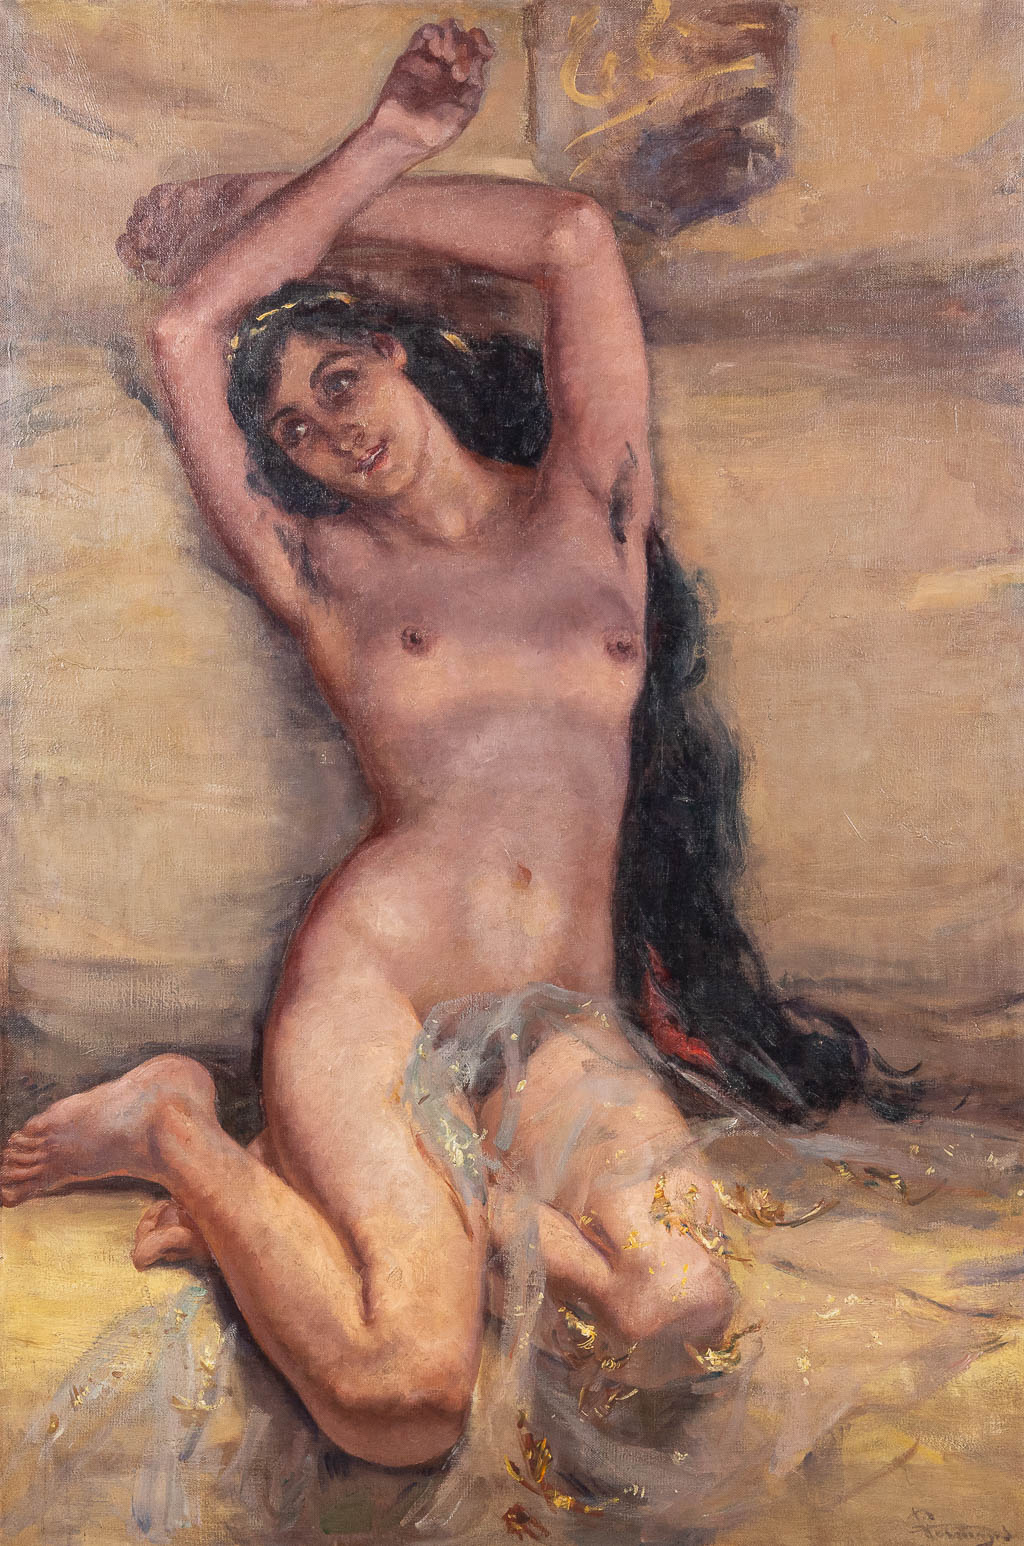 Charles HERMANS (1839-1924) 'Nude' oil on canvas. (W: 97 x H: 145 cm)